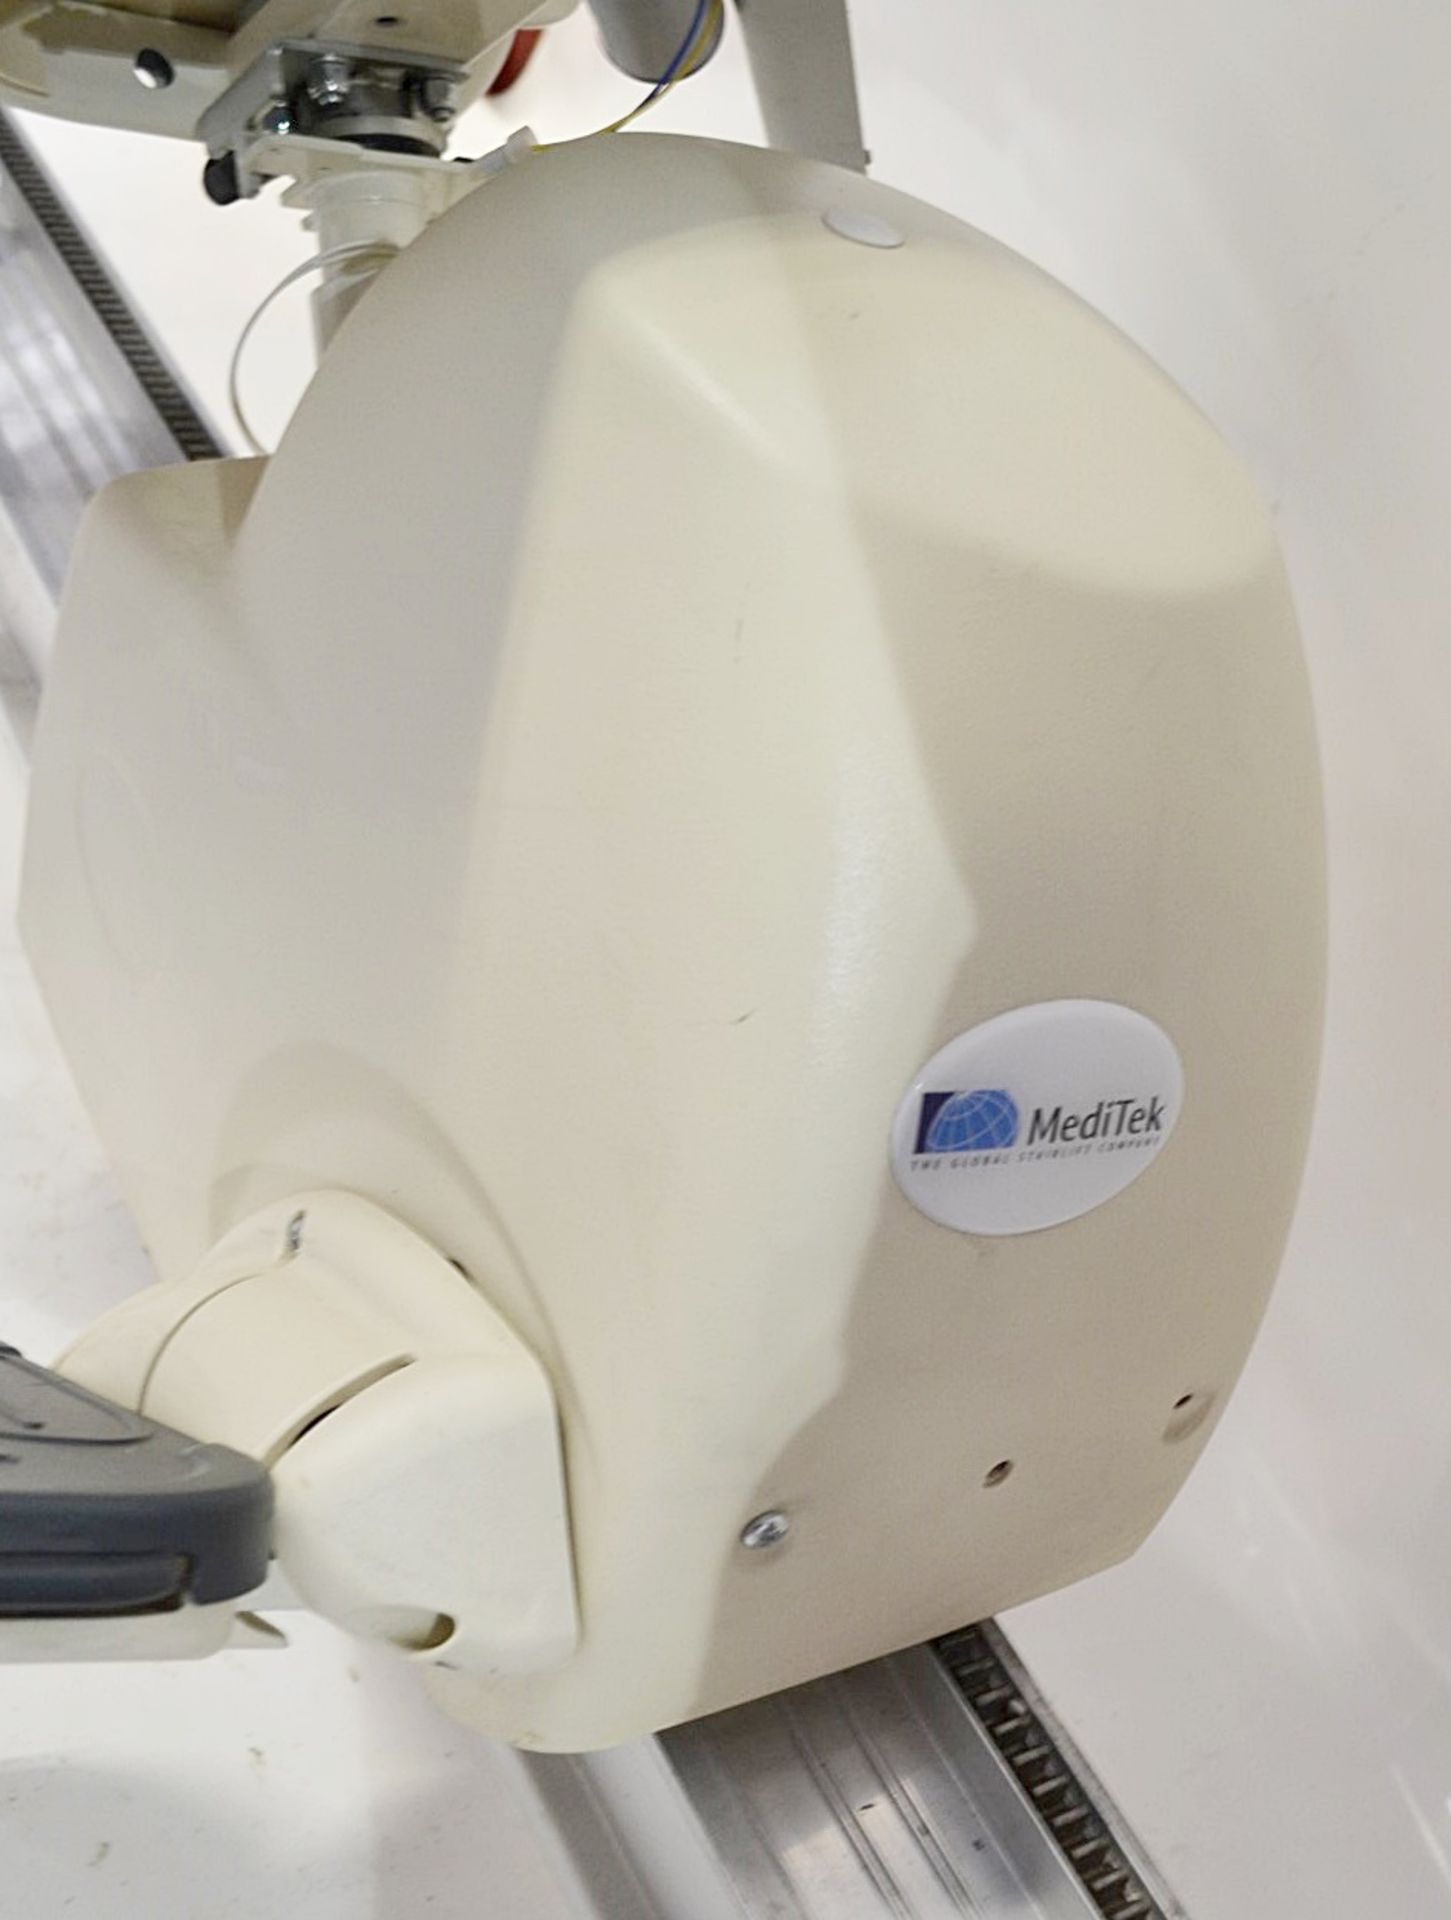 1 x Meditek D120 Deluxe Ascending Straight Stairlift With Powered Swivel Seat And Hinge Track - - Image 11 of 22